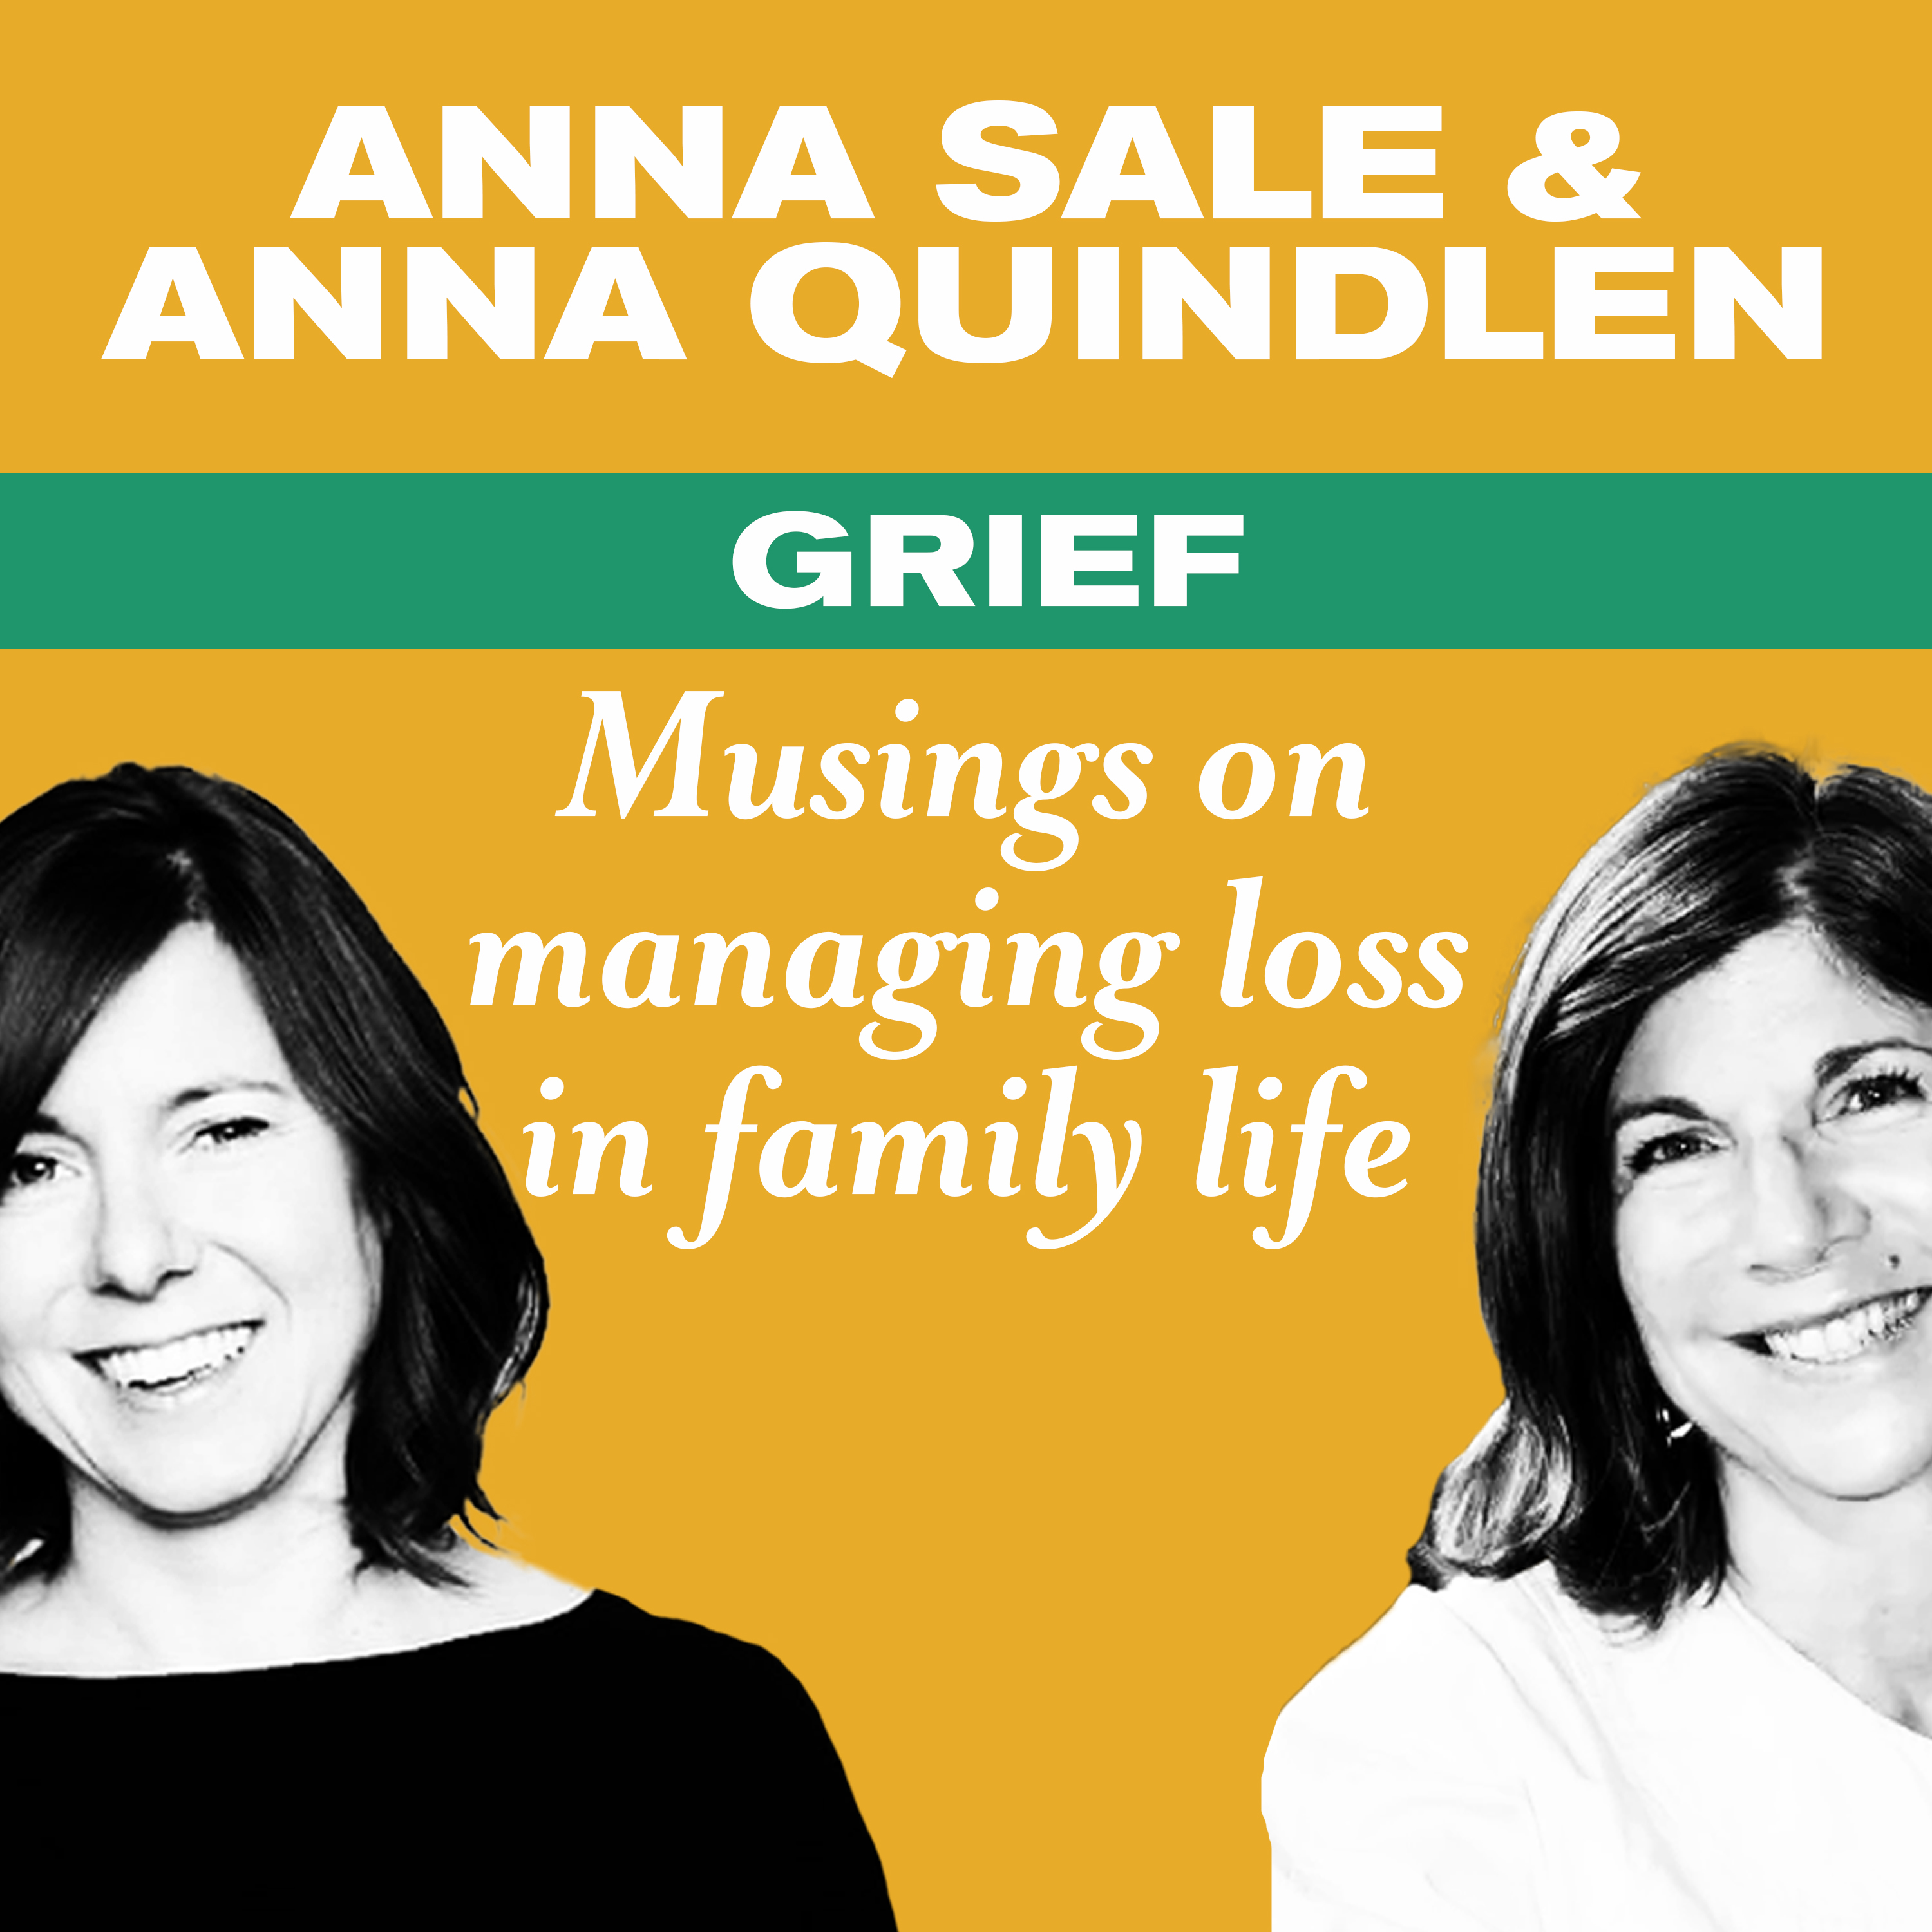 Grief: Musings on managing loss in family life, with Anna Quindlen and Anna Sale